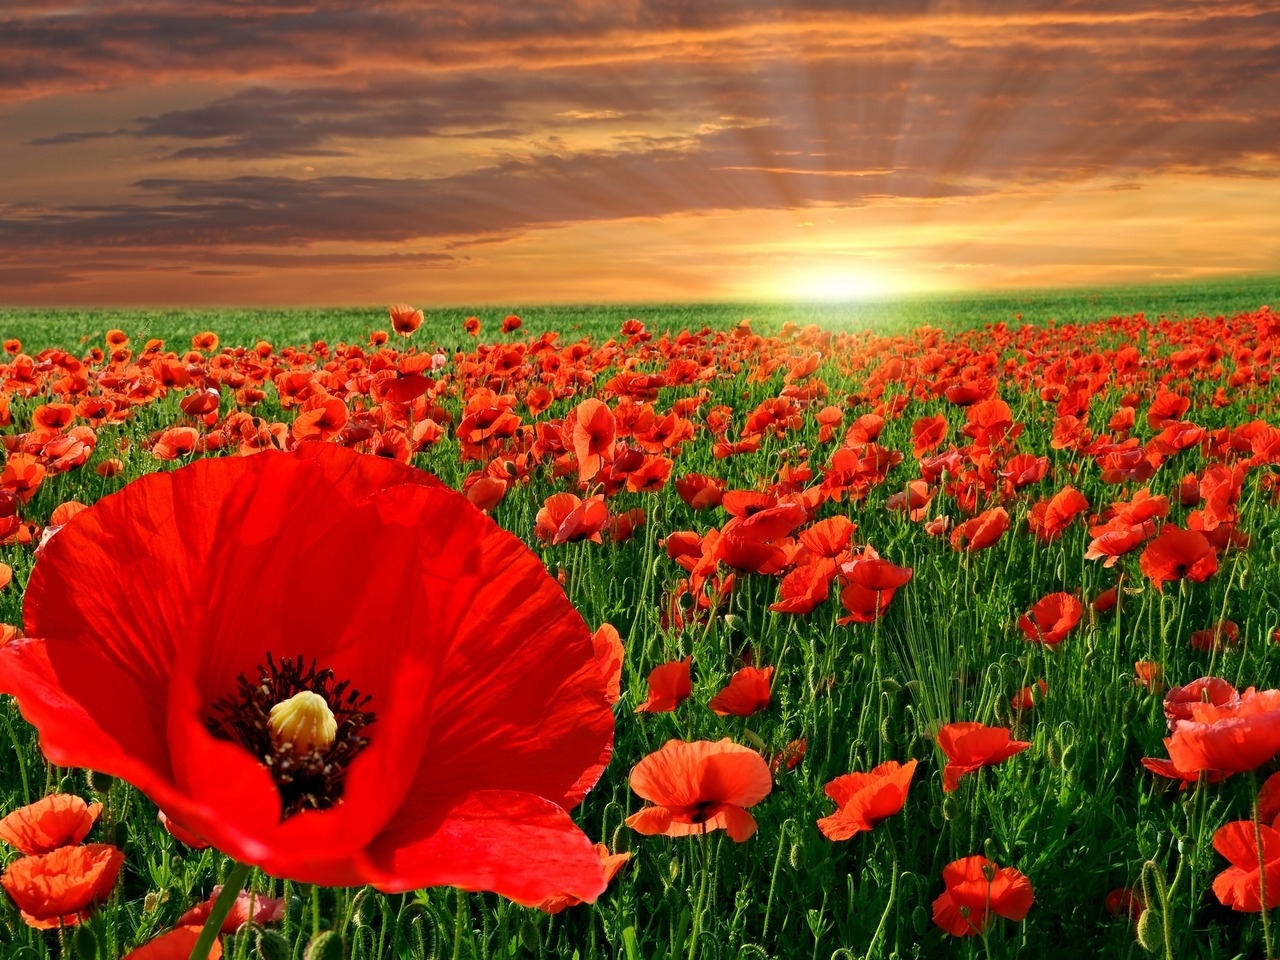 49326 download wallpaper nature, landscape, plants, poppies screensavers and pictures for free